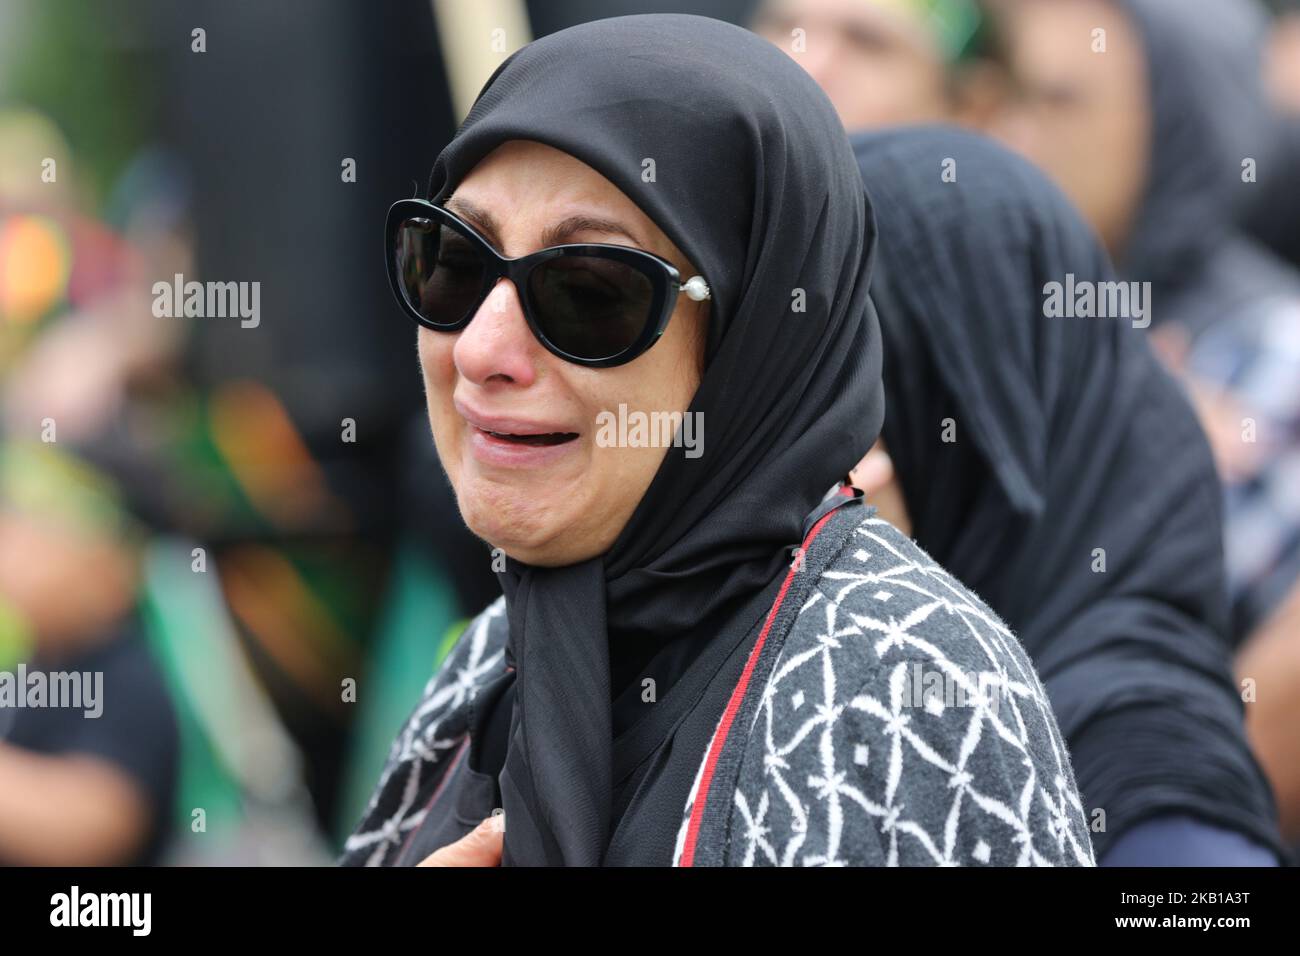 Woman crying as Shiite Muslim mourners take part in a Muharram procession in Toronto, Ontario, Canada, on September 20, 2018. Hundreds of Shiite Muslims took to the streets to commemorate the death of the third Imam, Hussein, slain along with 72 of his comrades in a battle against the army of the seventh-century caliph Yazid. In keeping with the military nature of these Ashura processions, mourners simulate self-flagellation and pound on their chests to the thump of a bass drum and the crackle of a snare. (Photo by Creative Touch Imaging Ltd./NurPhoto) Stock Photo